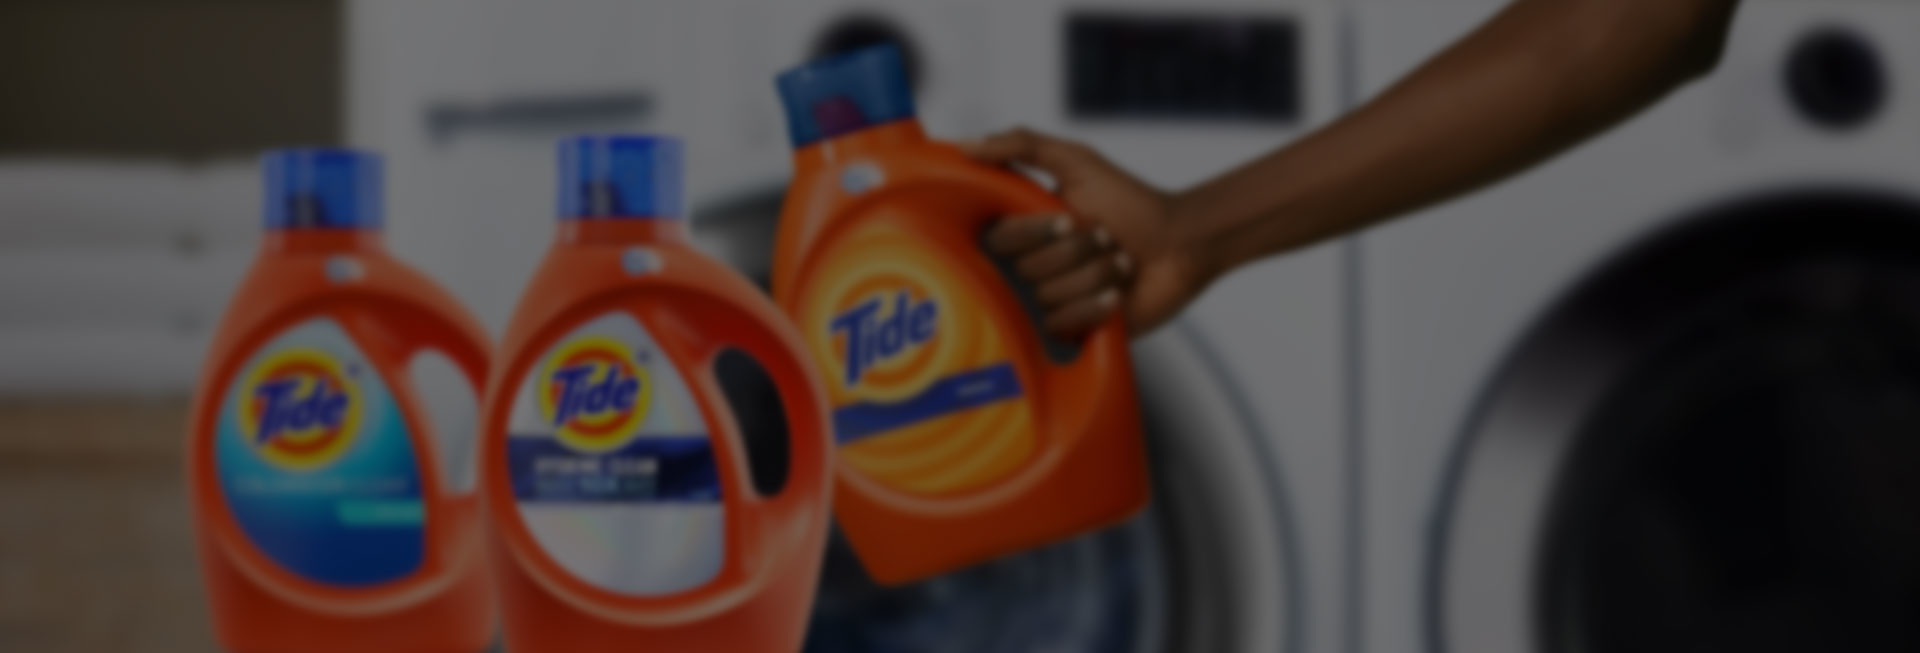 A person holding a Tide liquid detergent product in front of a washer